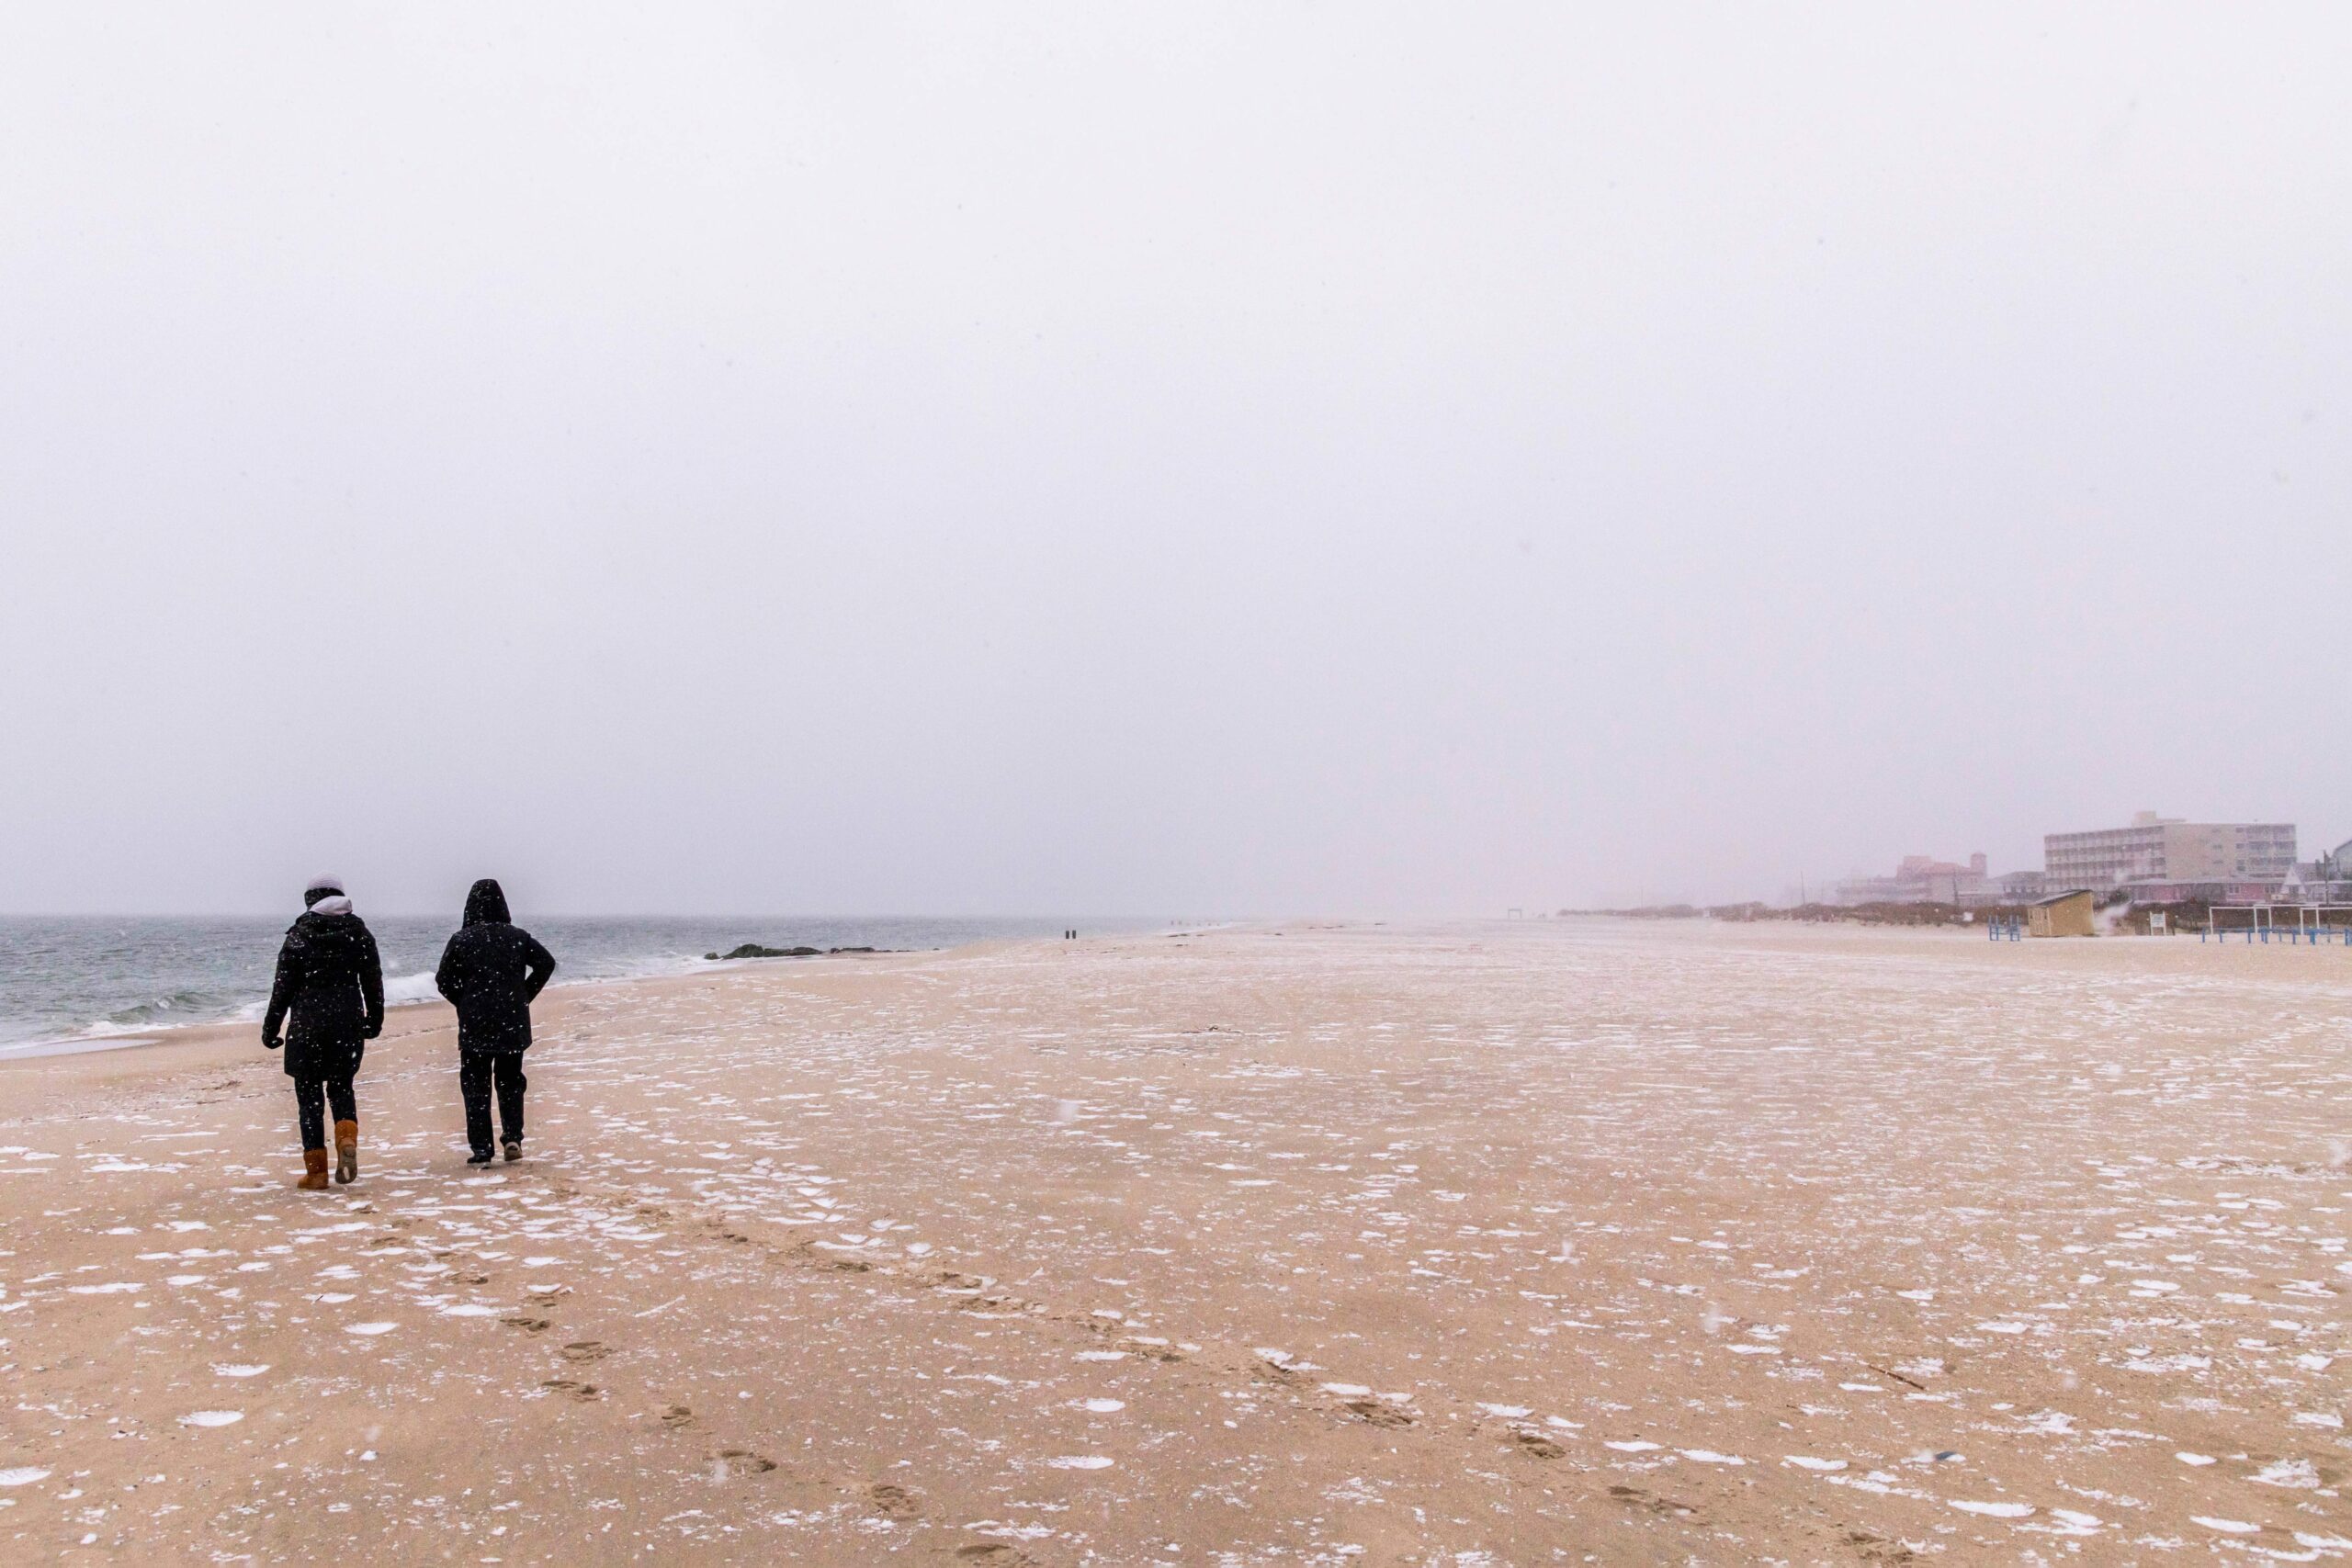 Two people walking on the beach with a cloudy sky and snow in the sand